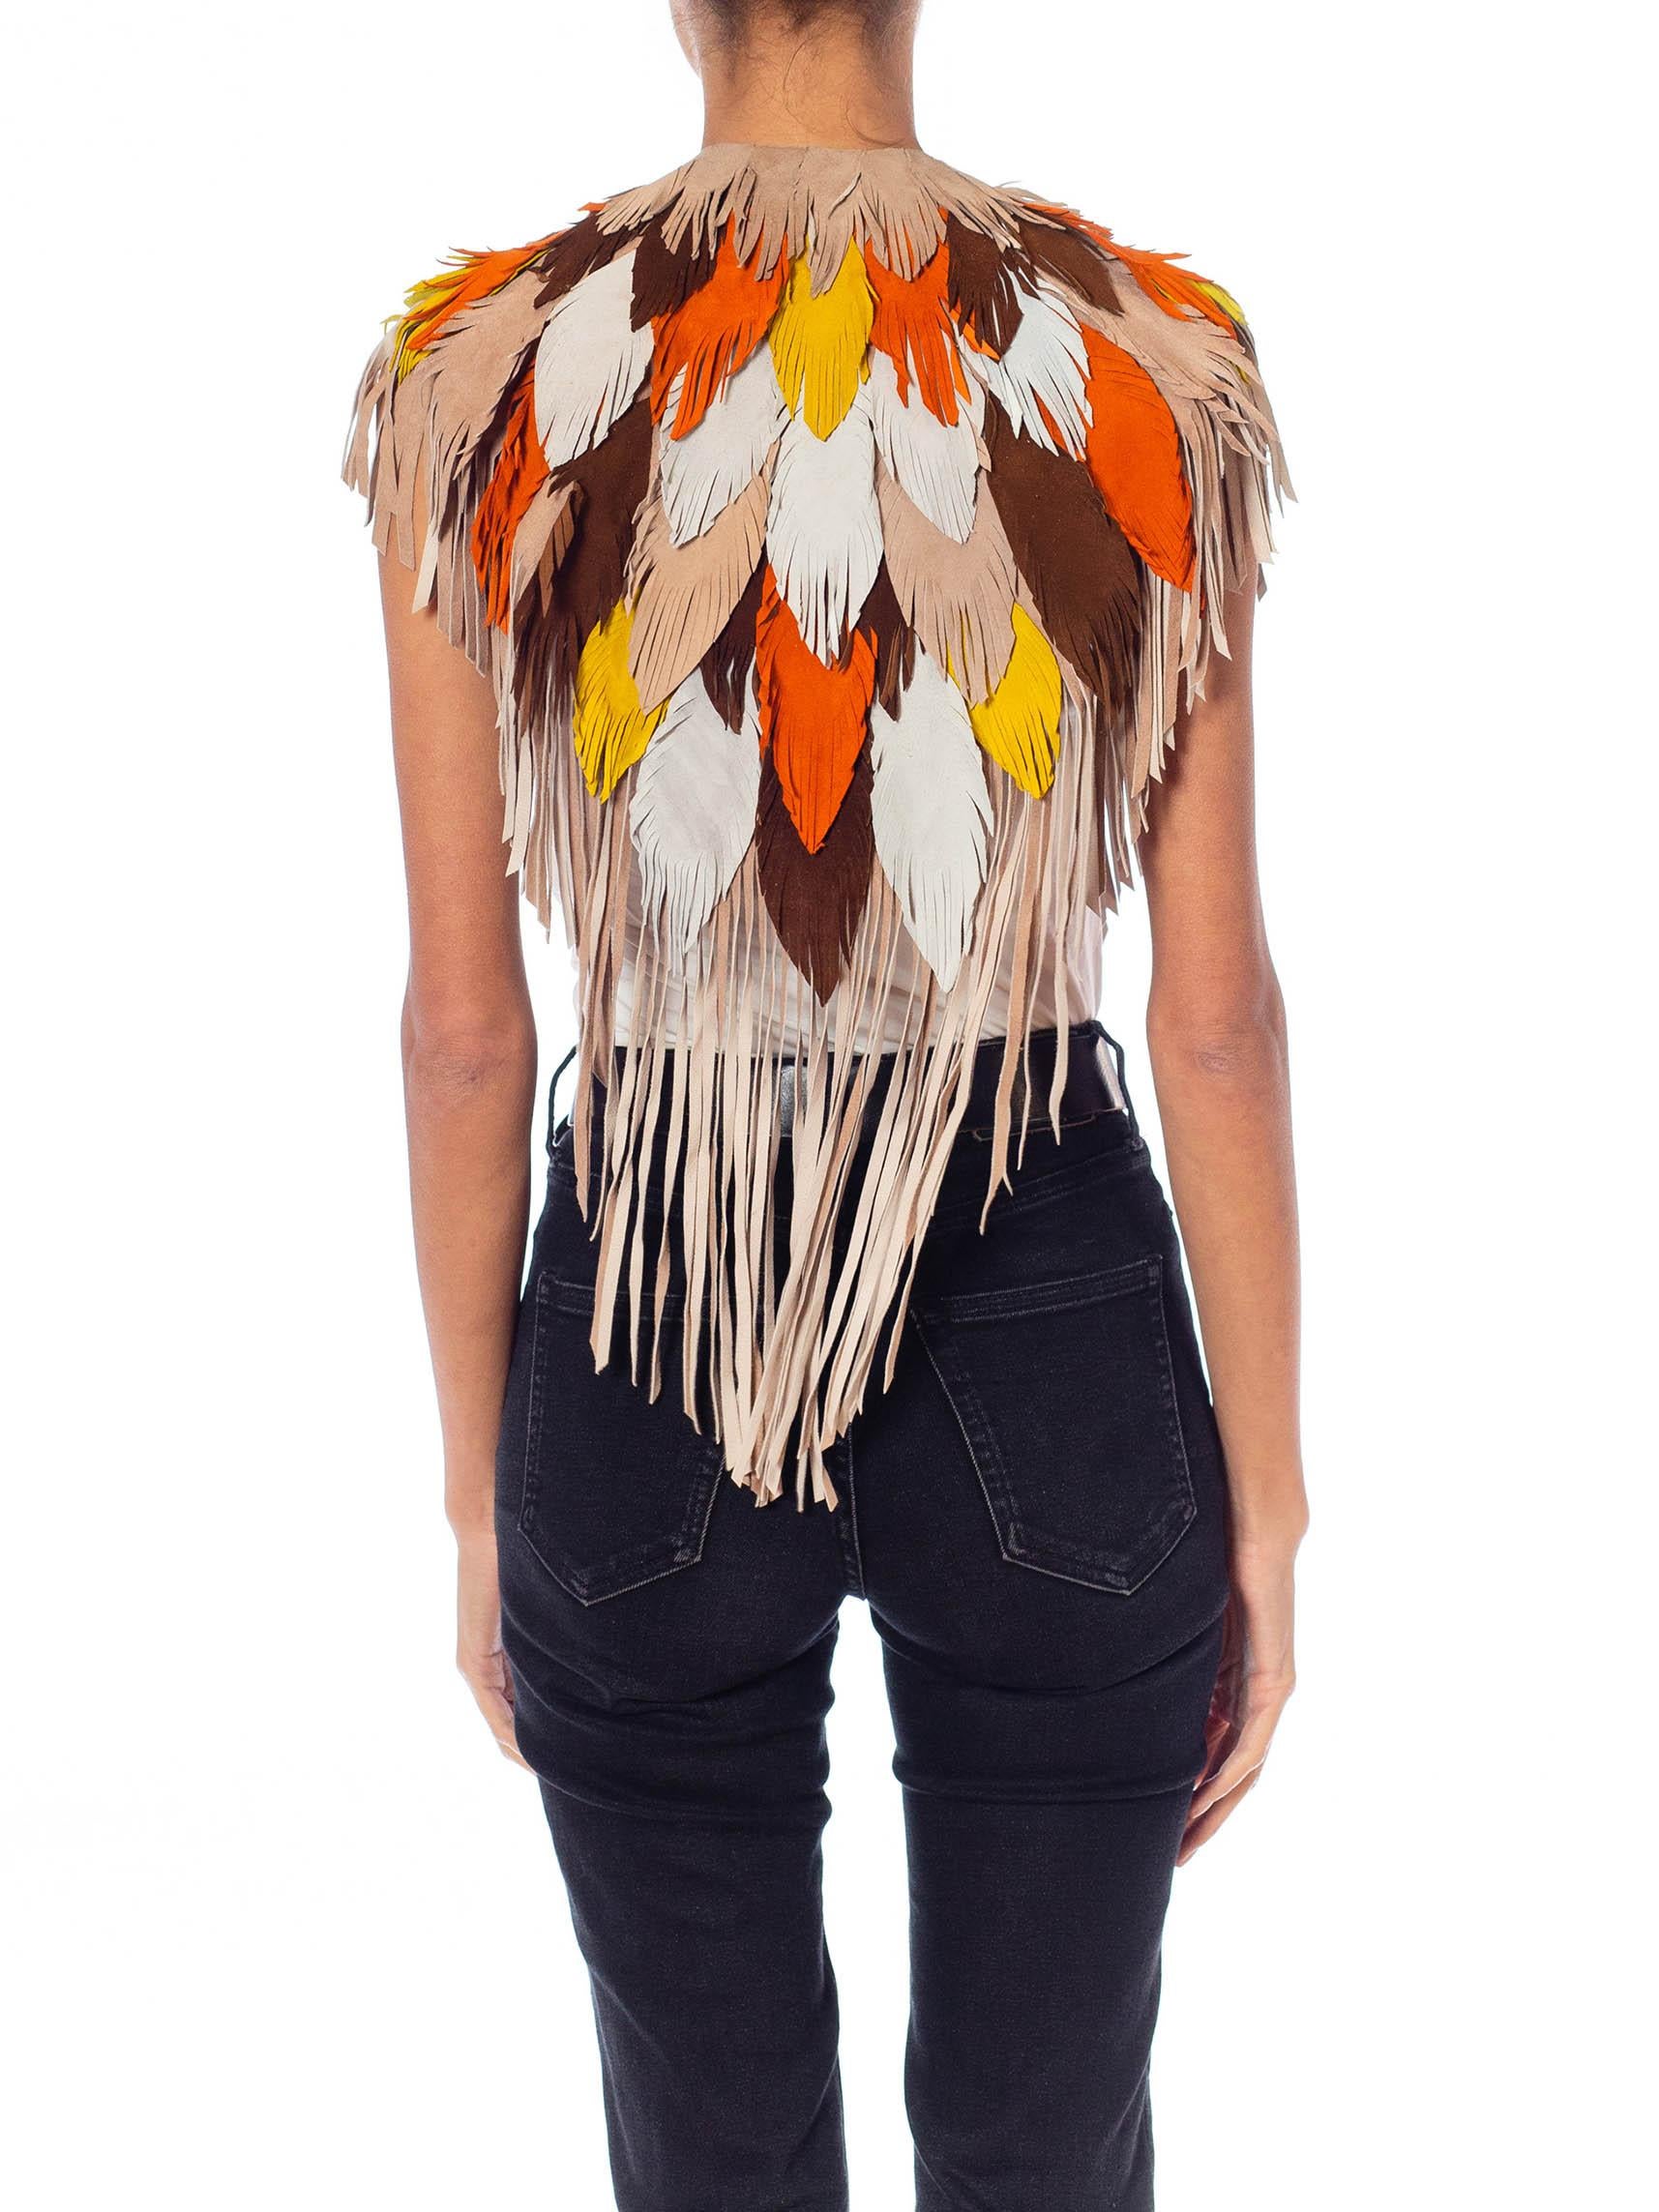 MORPHEW COLLECTION Phoenix Sunset Suede Fringe Feather Leather Cape For Sale 2